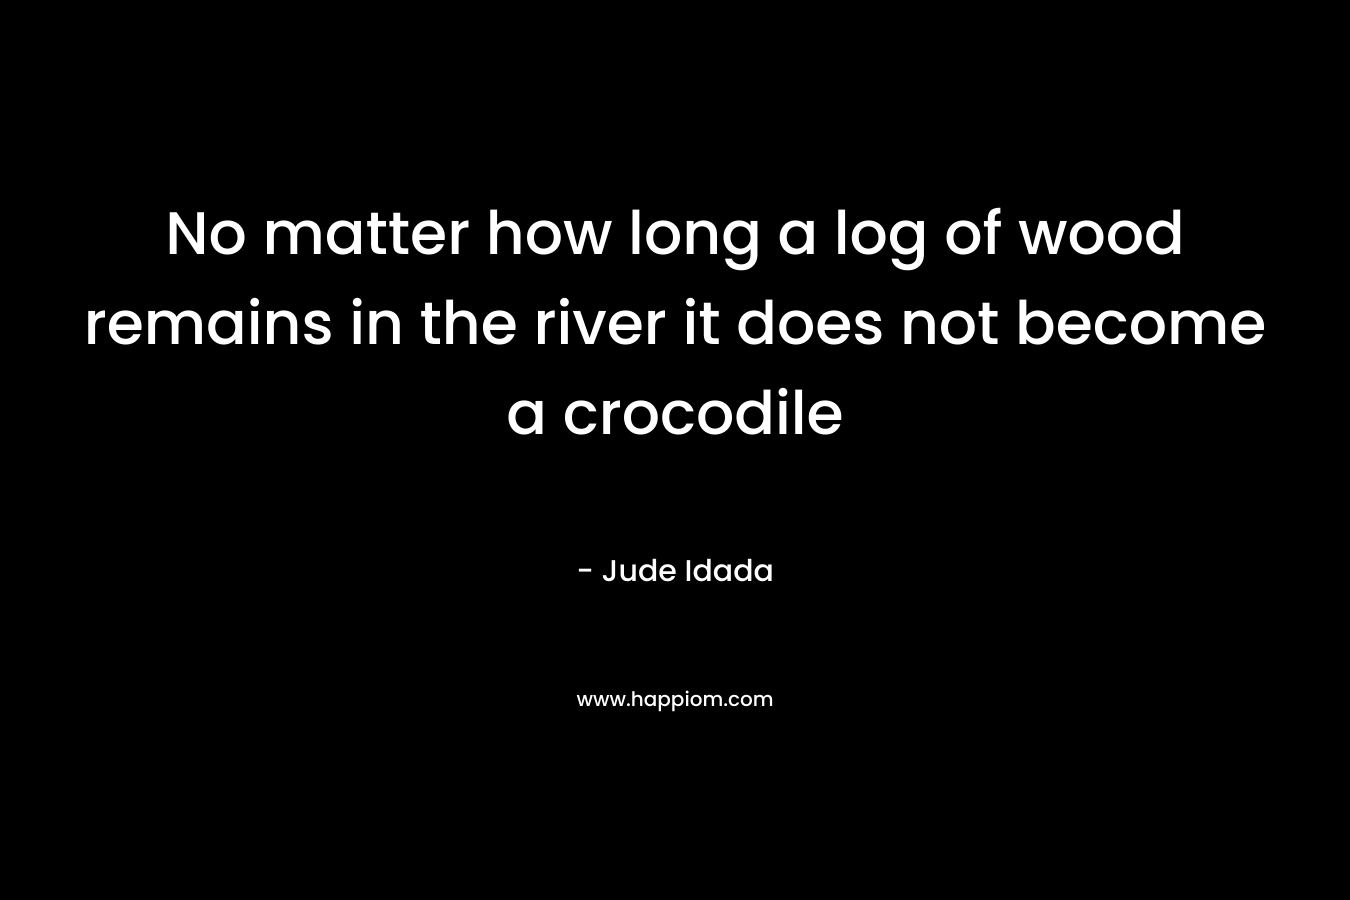 No matter how long a log of wood remains in the river it does not become a crocodile